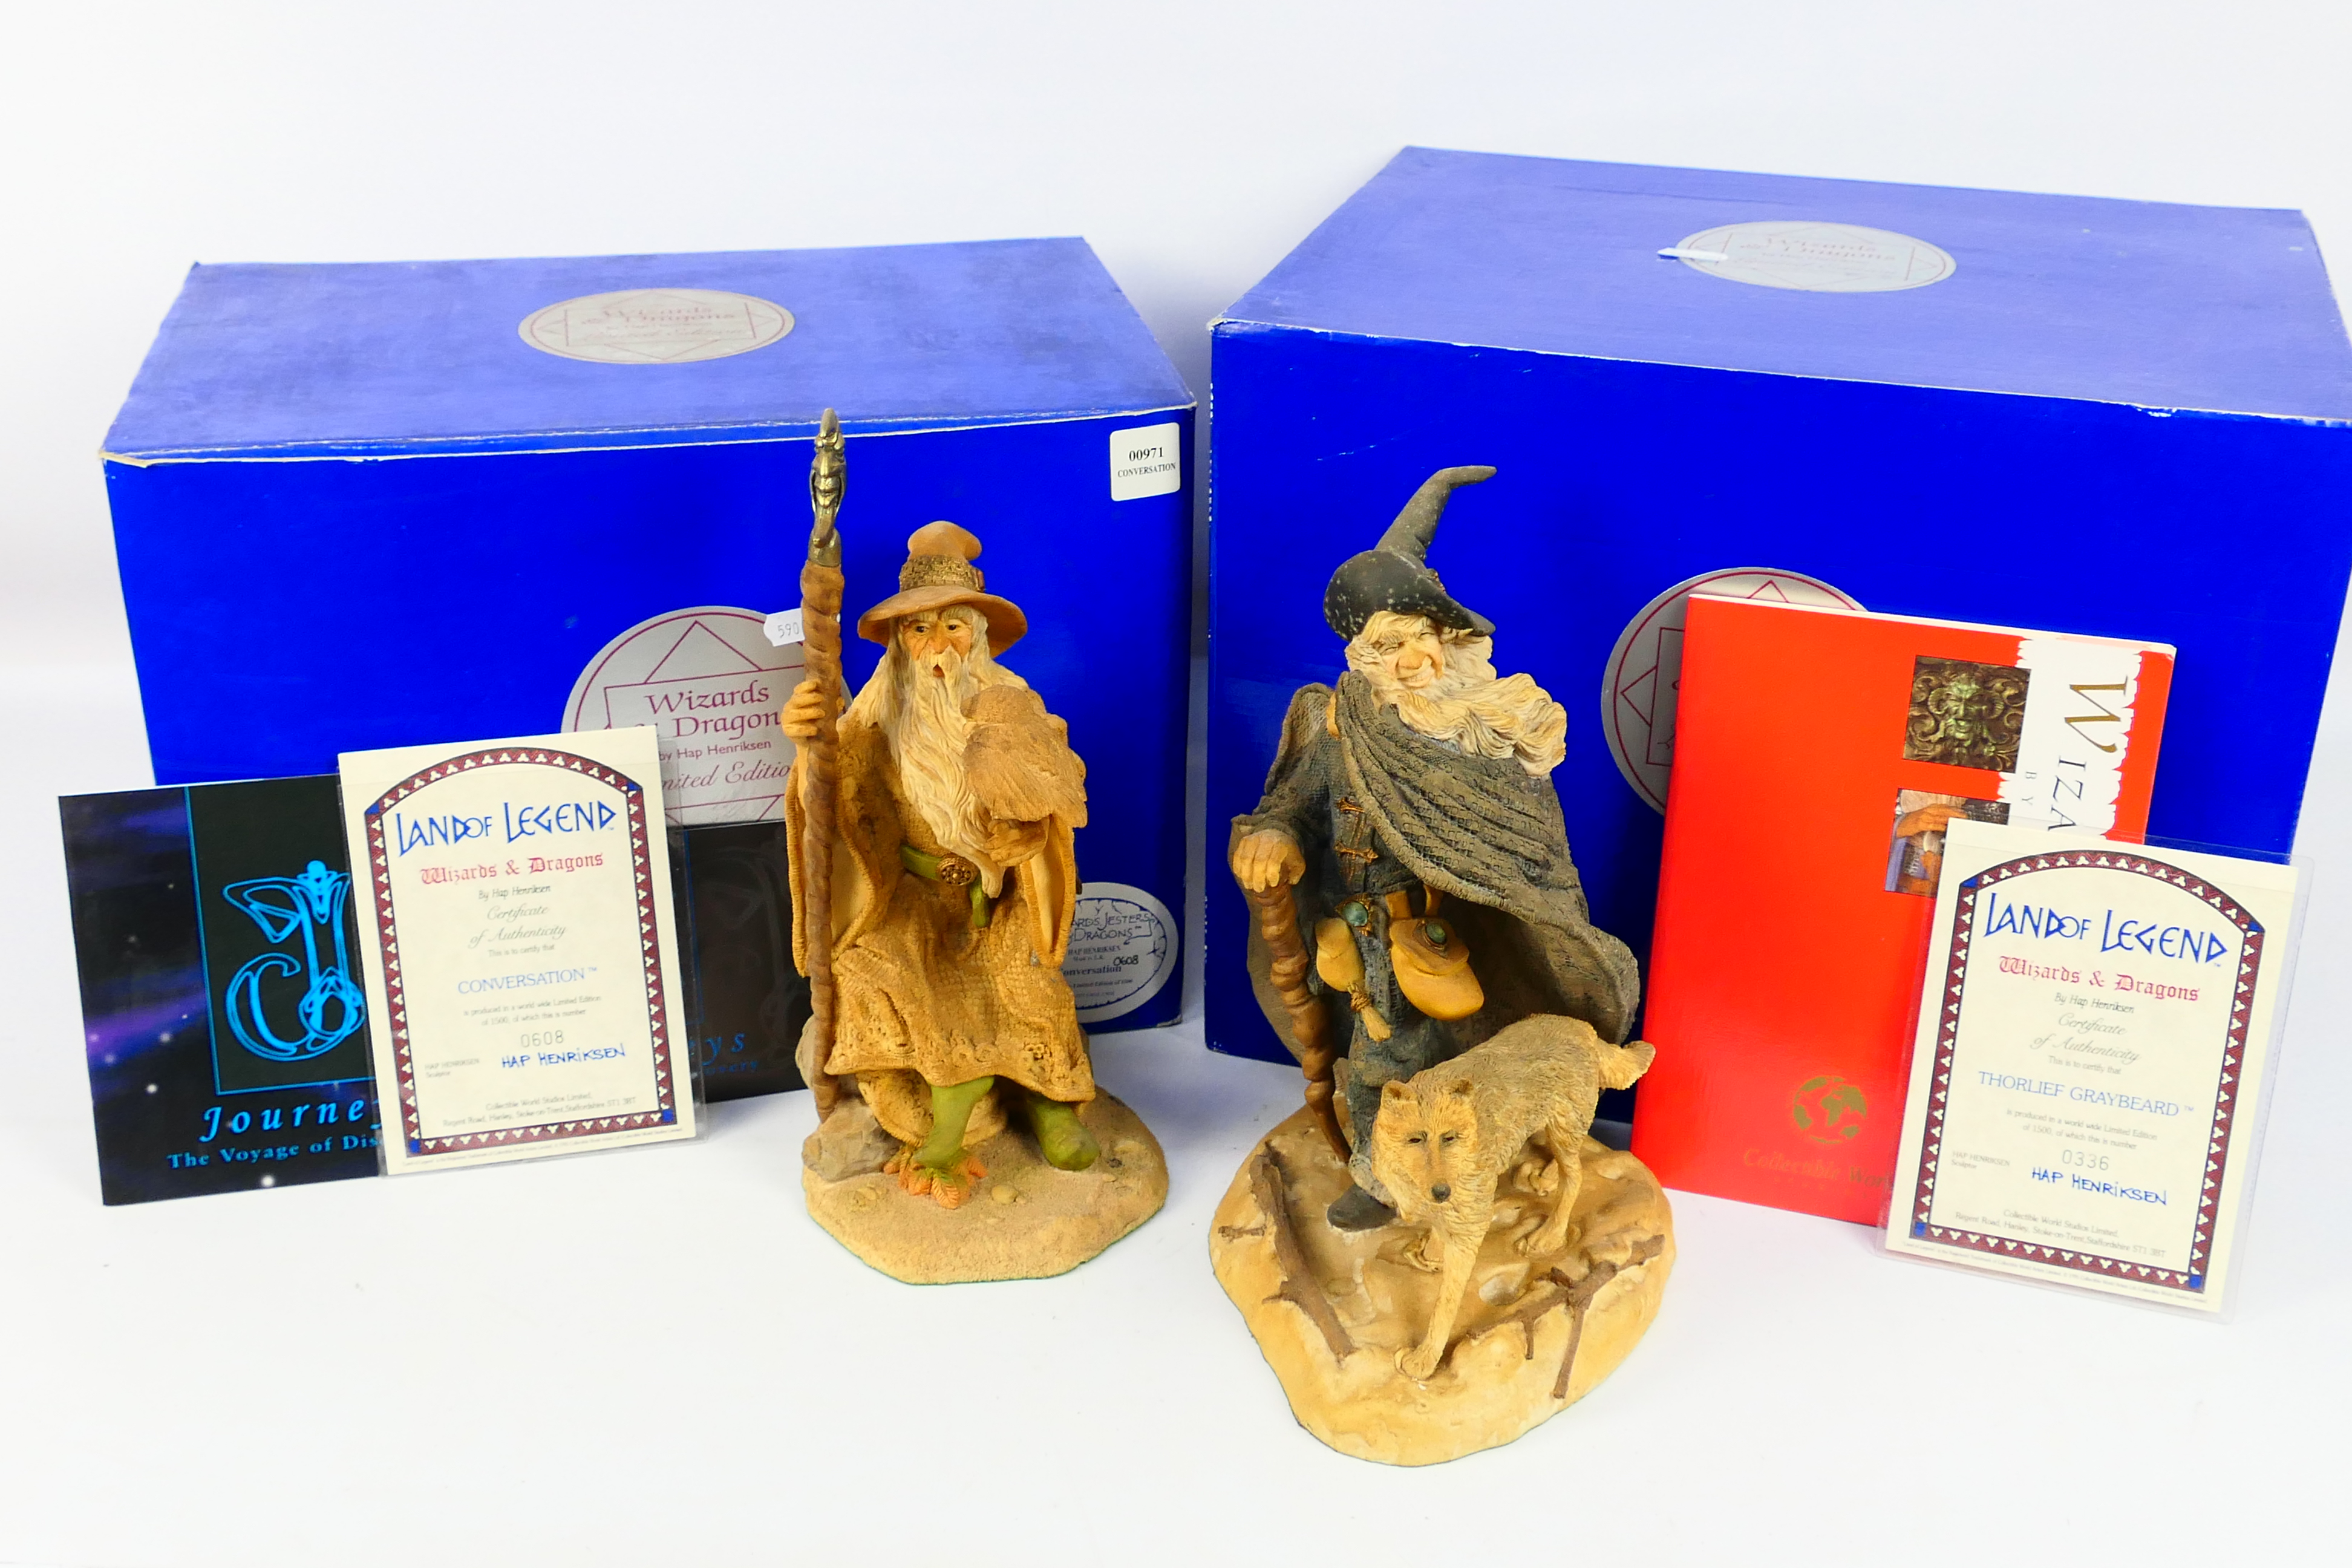 Wizards & Dragons - Two boxed limited edition Land Of Legend fantasy figures designed by Hap